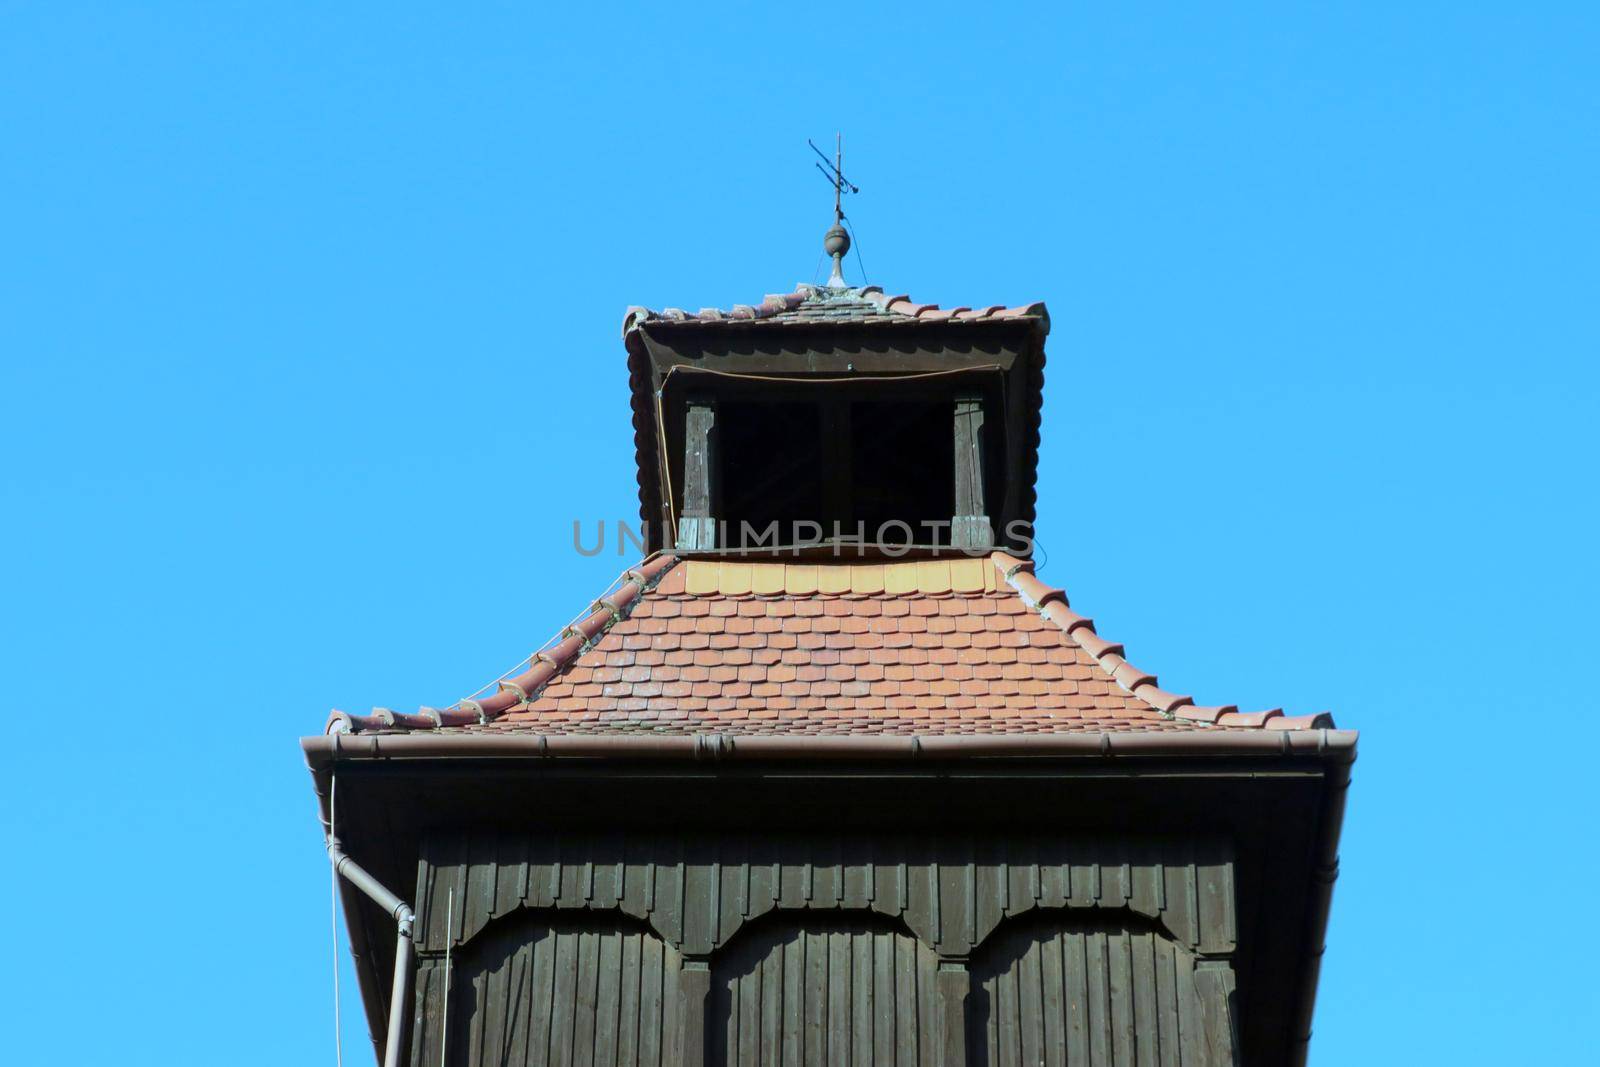 The old wooden part of the dome of a church or church against the sky